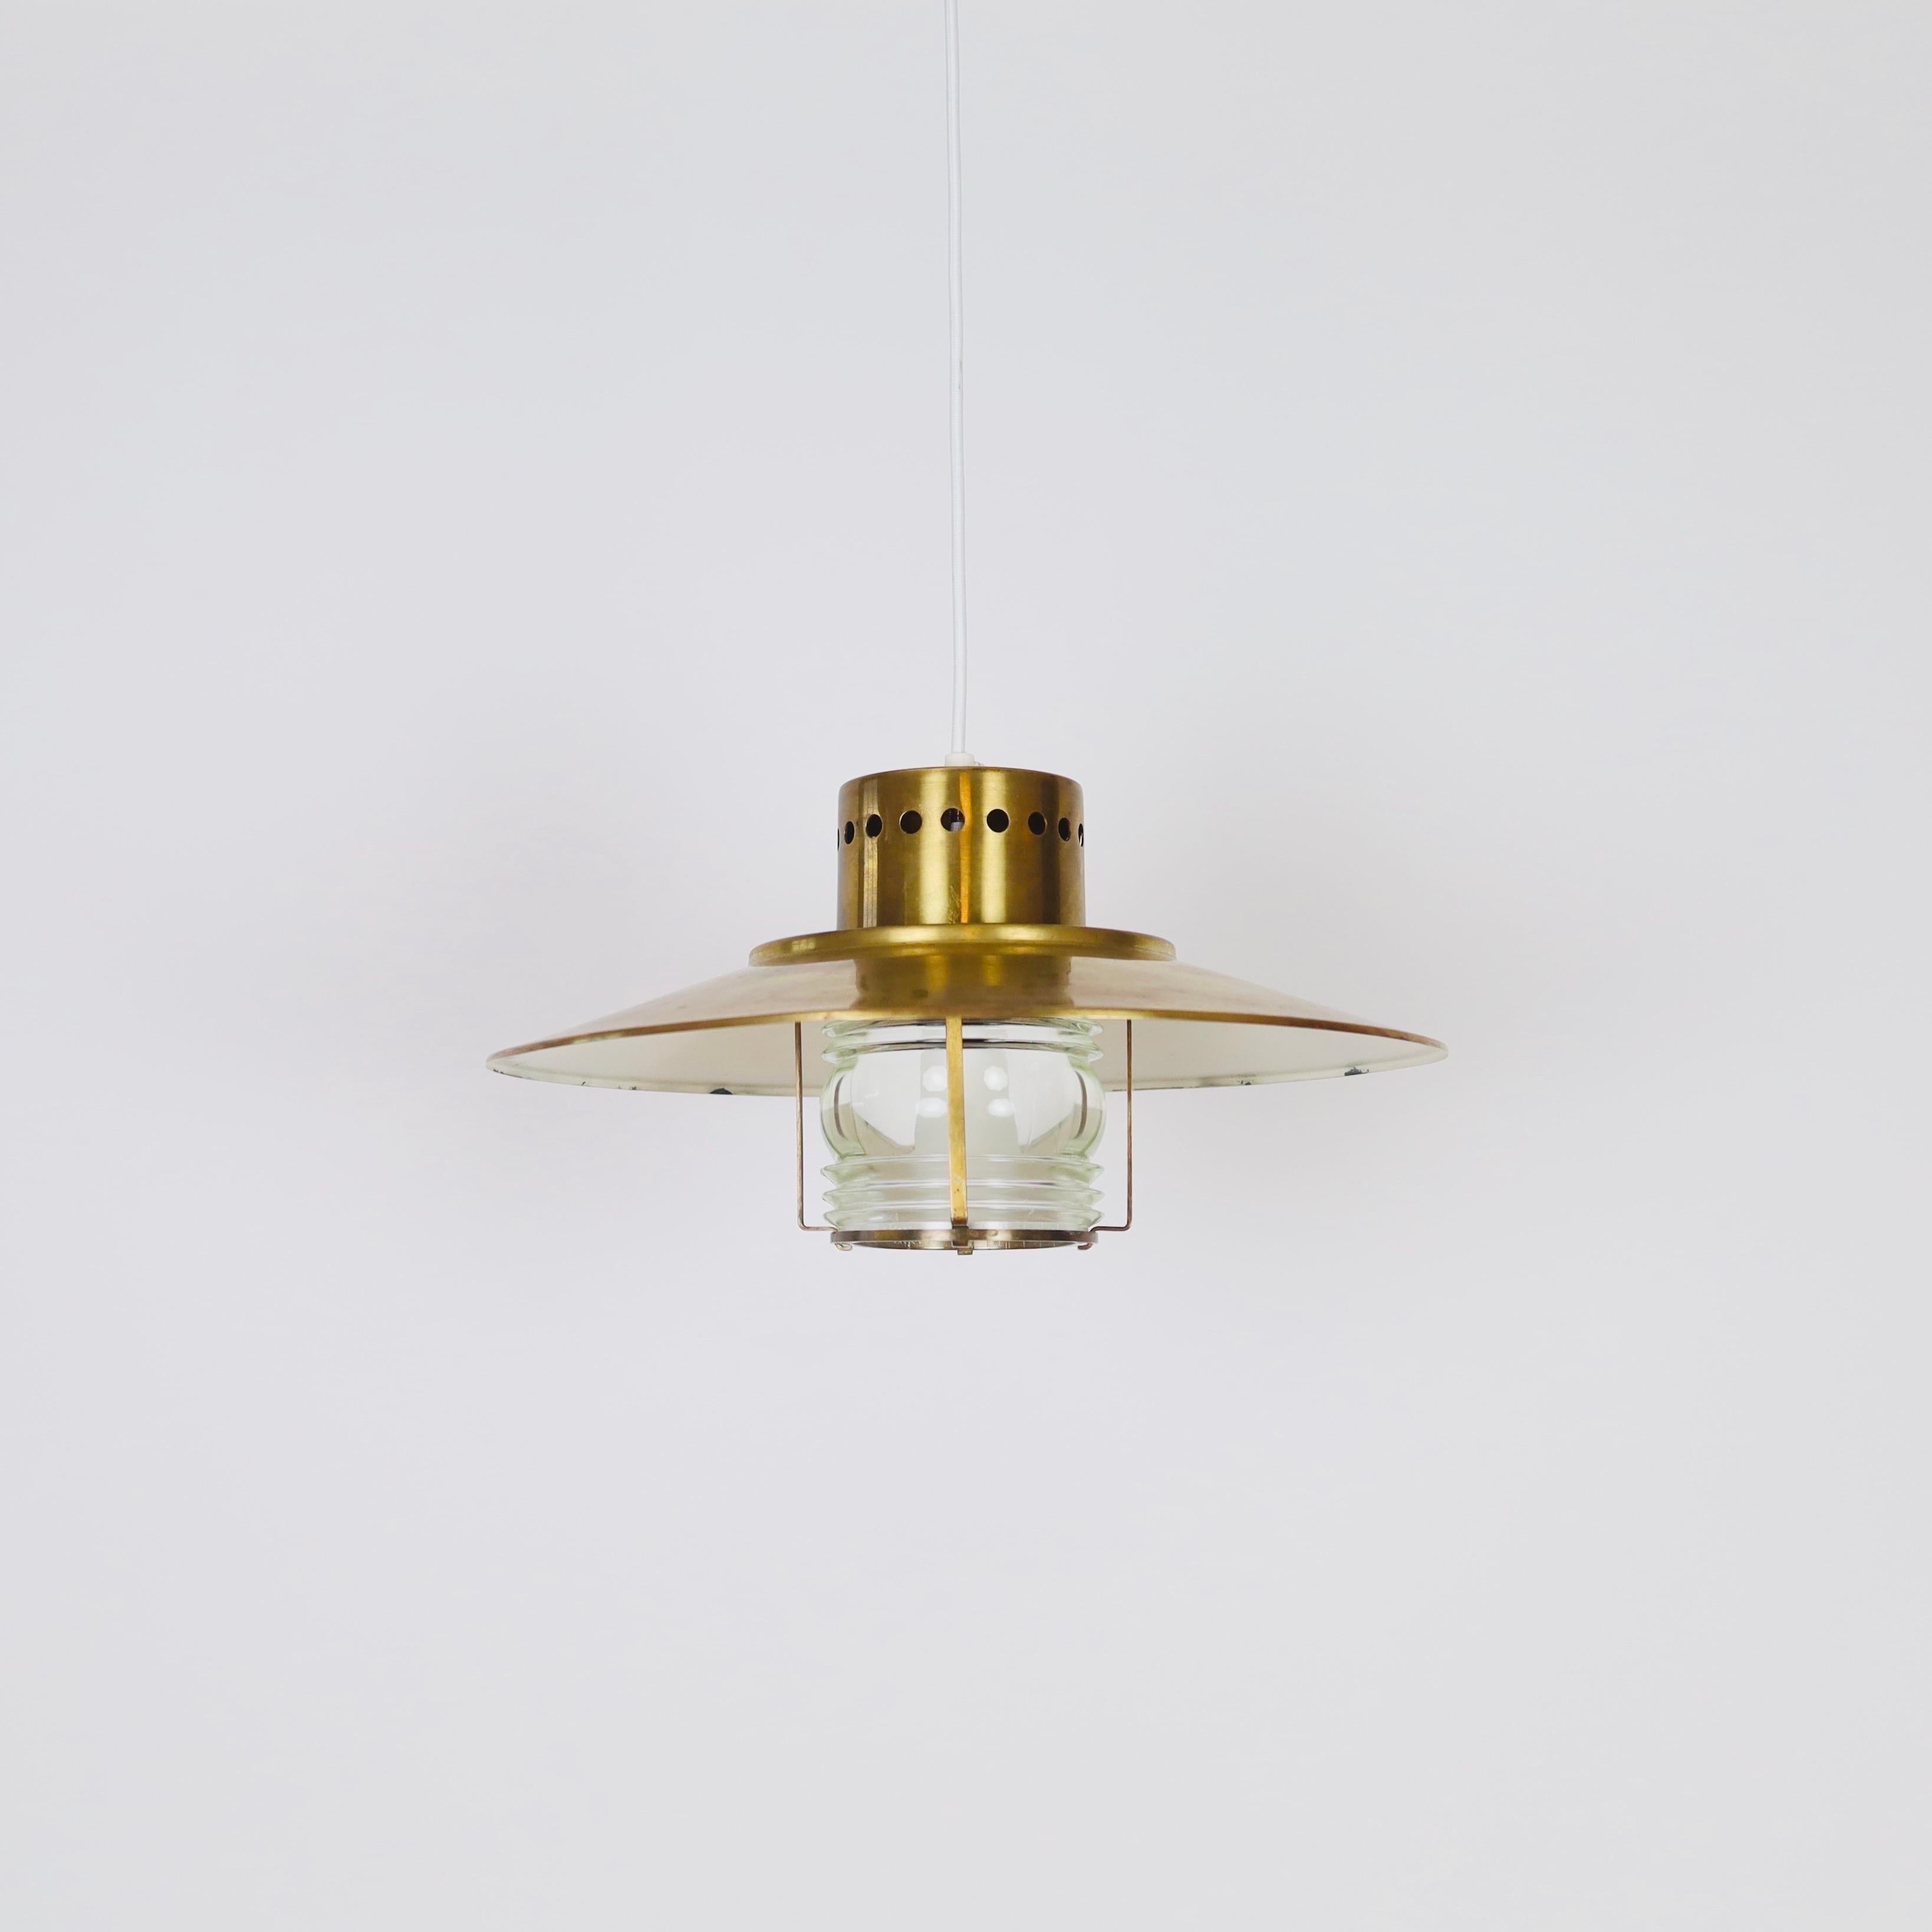 Mid-20th Century A brass pendant light by Svend Aage Holm Sorensen, 1960s, Denmark For Sale